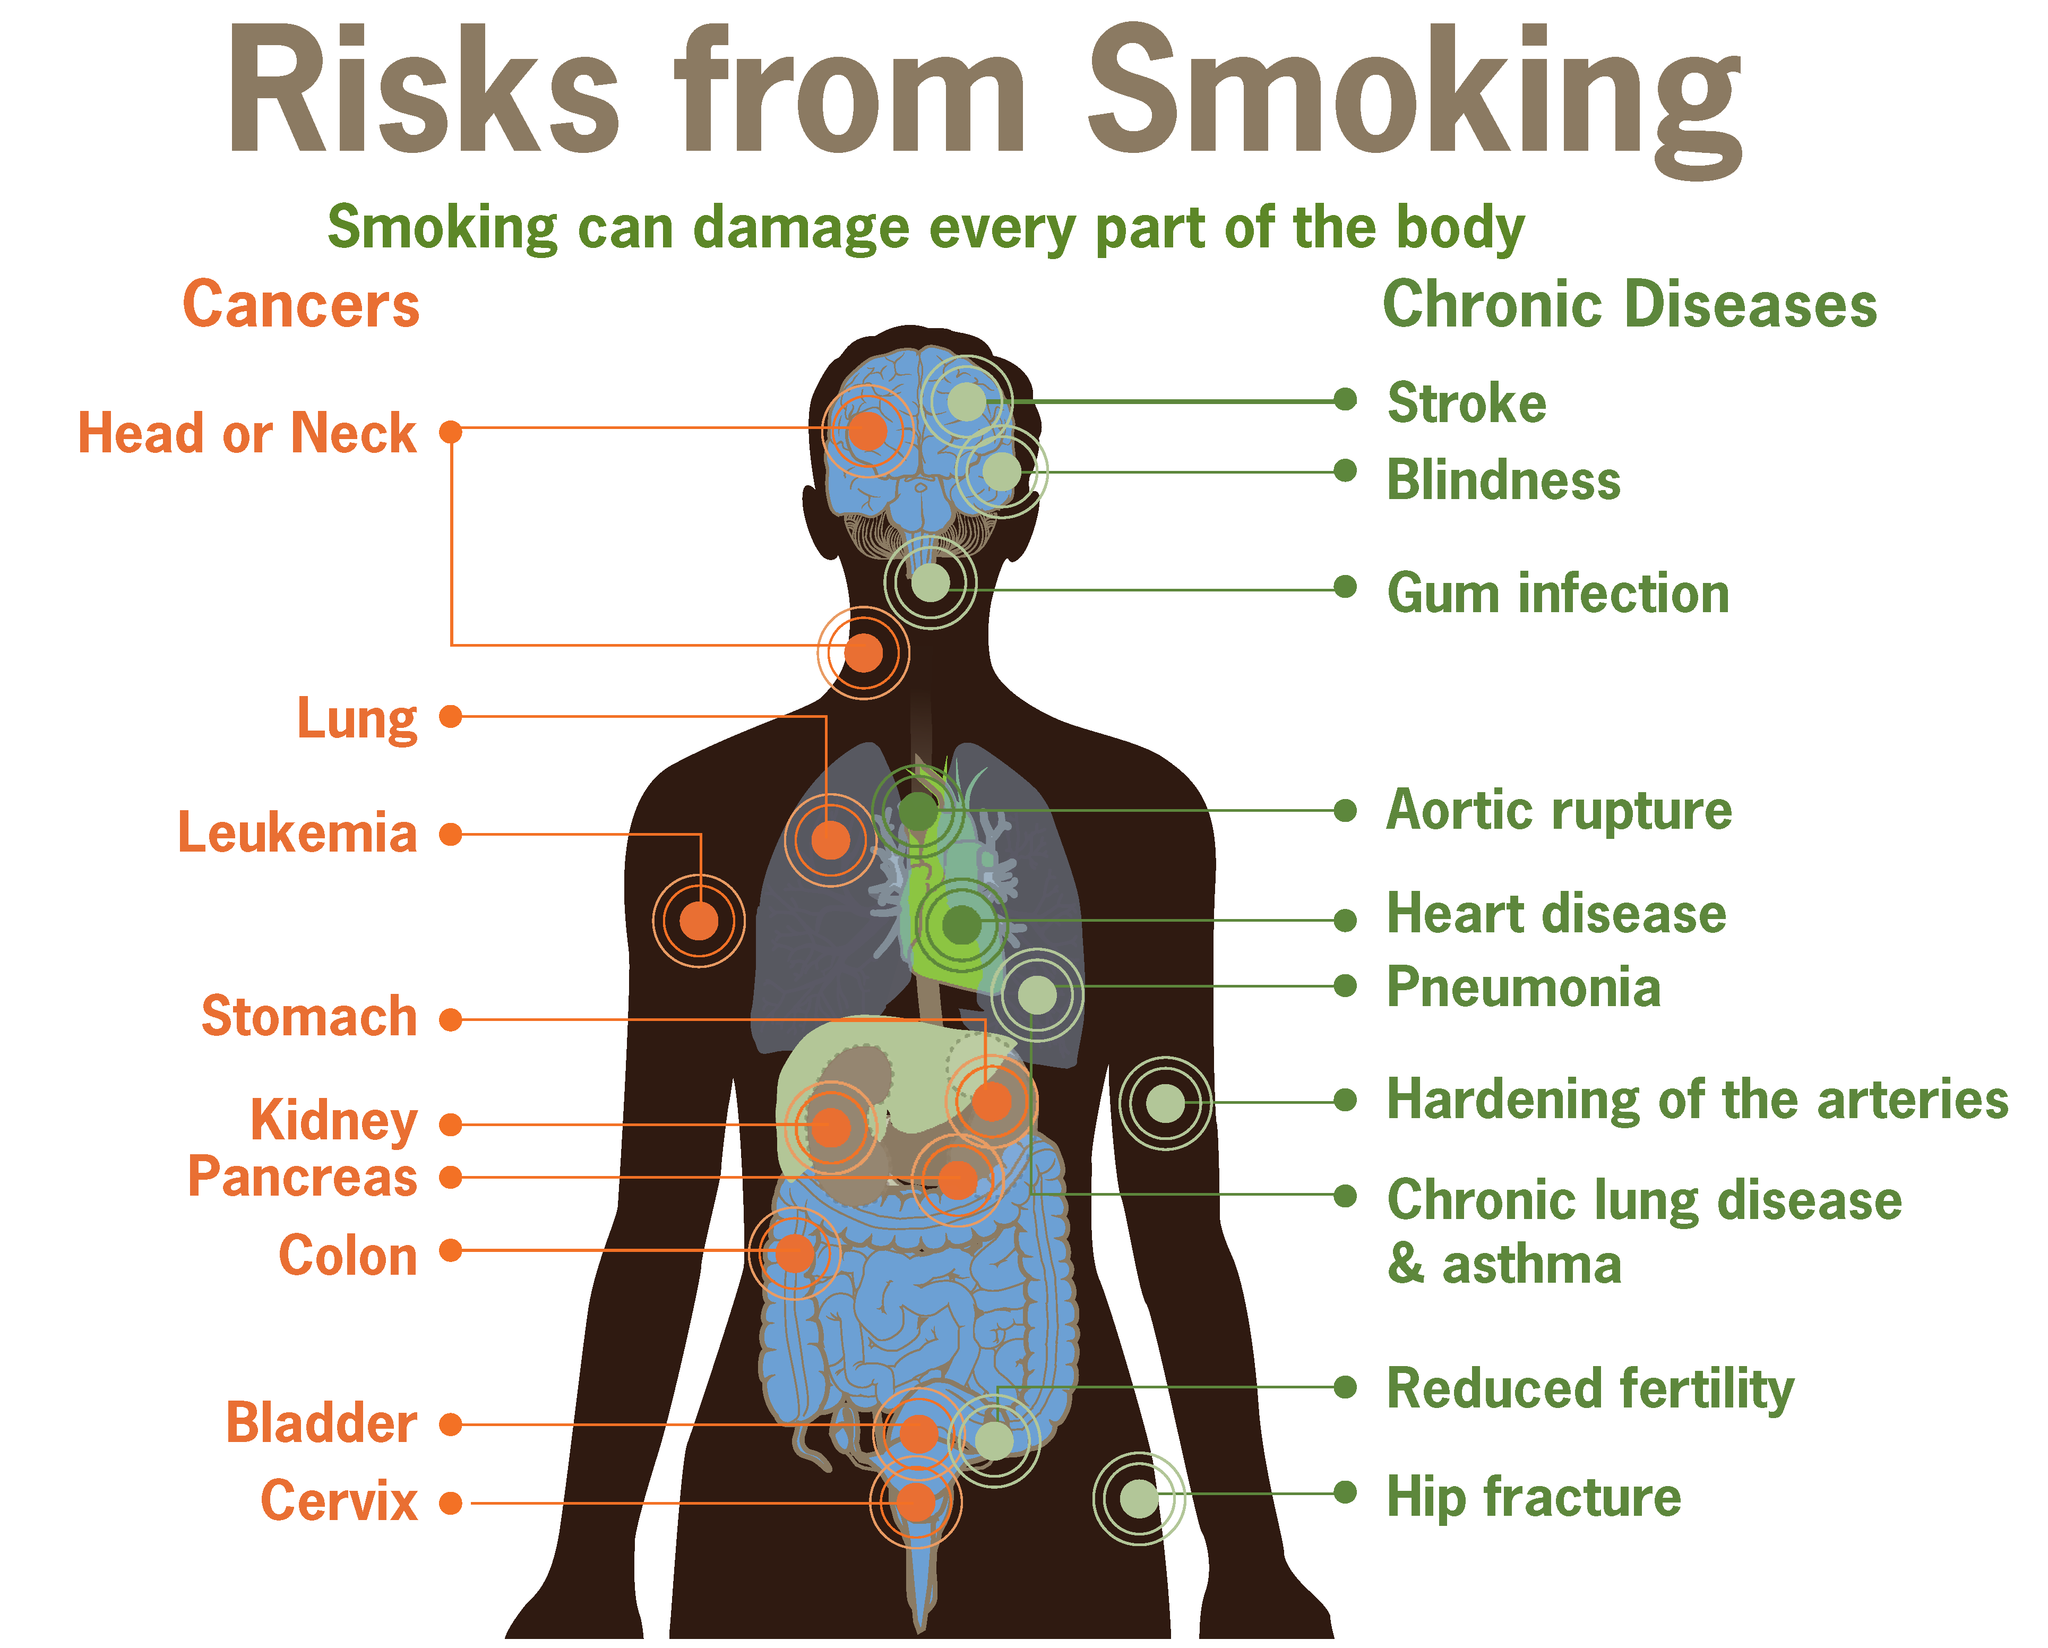 15.6.2 Effects of Smoking